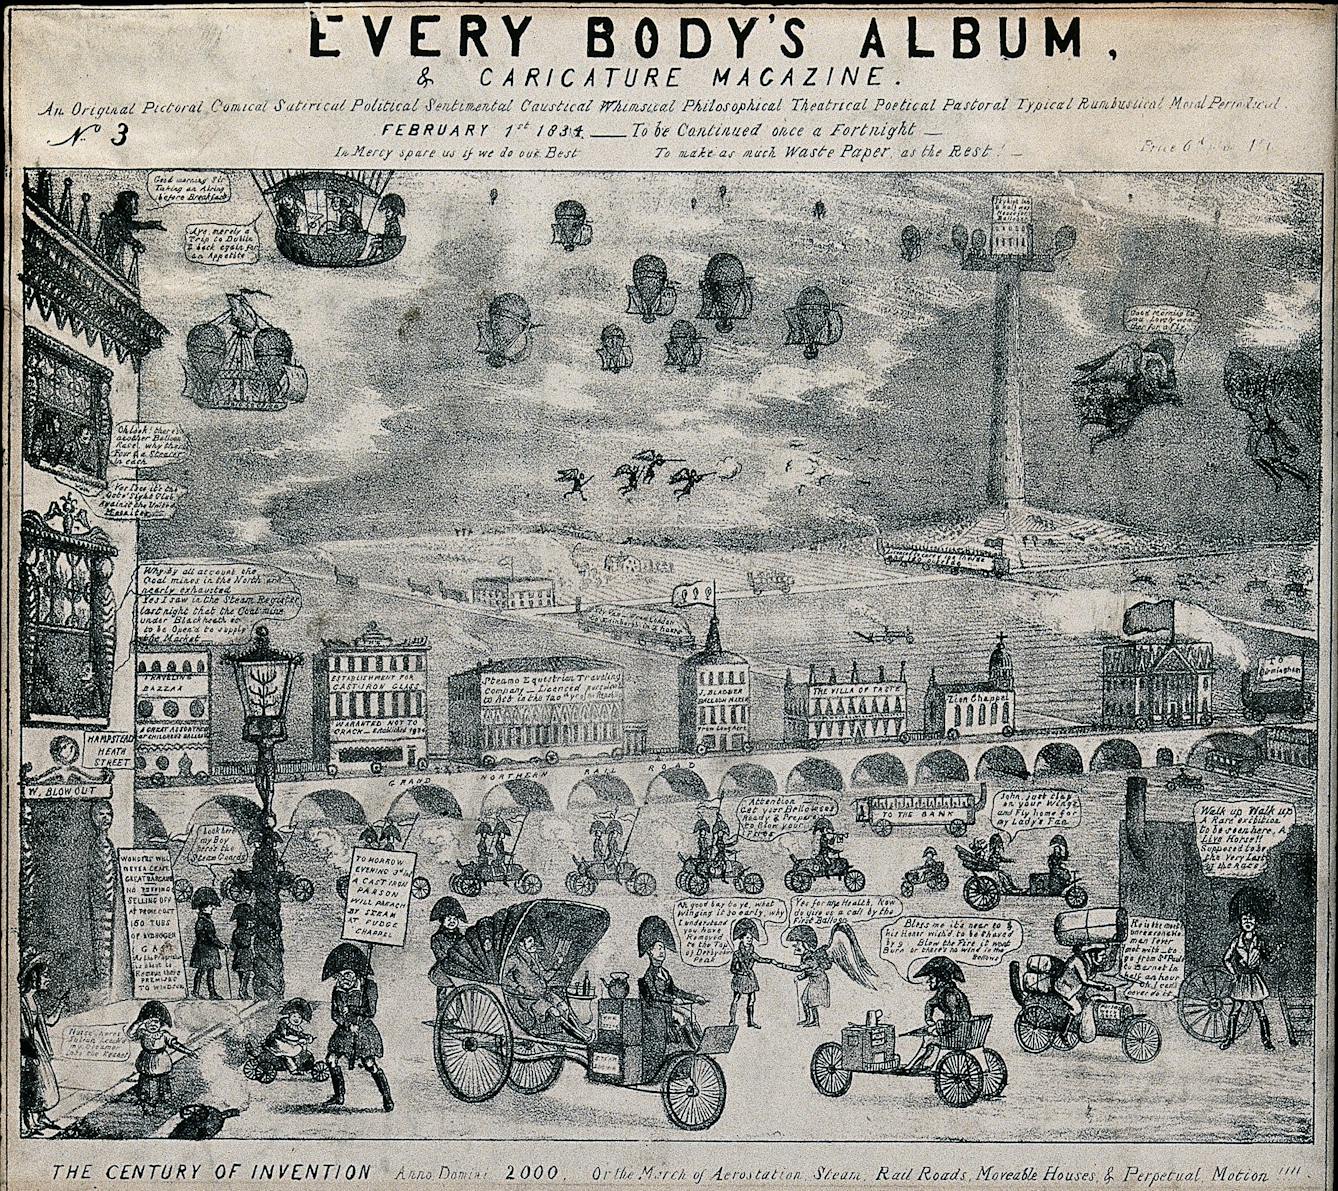 Lithograph showing transportation of the future as imagined in 1834, featuring hot air balloons in the sky and motor vehicles manned by servants in large hats below on the roads.